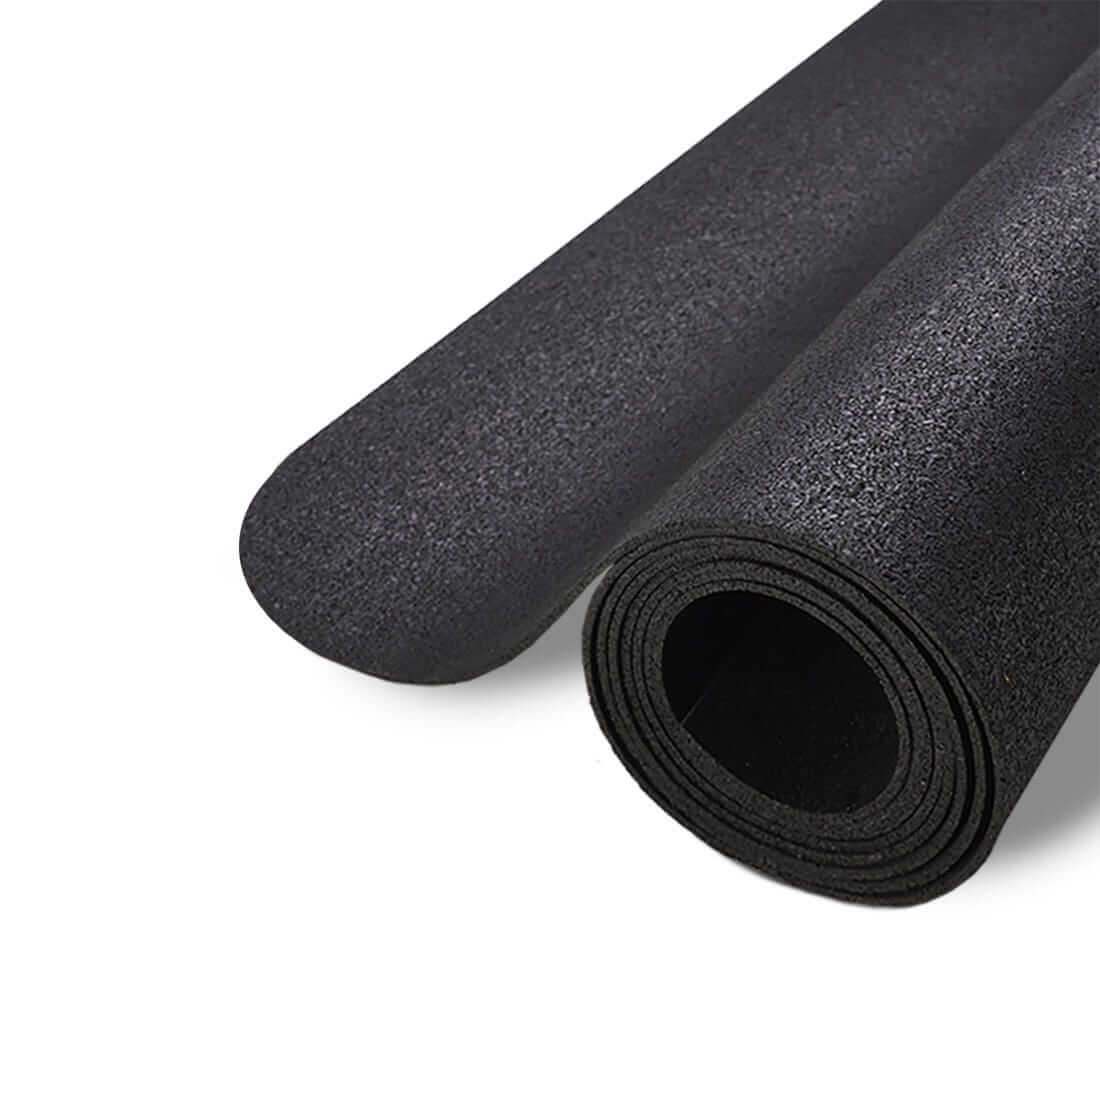 Gorilla Mats Premium Large Exercise Mat – 8' x 4' x 1/4 Ultra Durable,  Non-Slip, Workout Mat for Instant Home Gym Flooring – Works Great on Any  Floor Type or C…